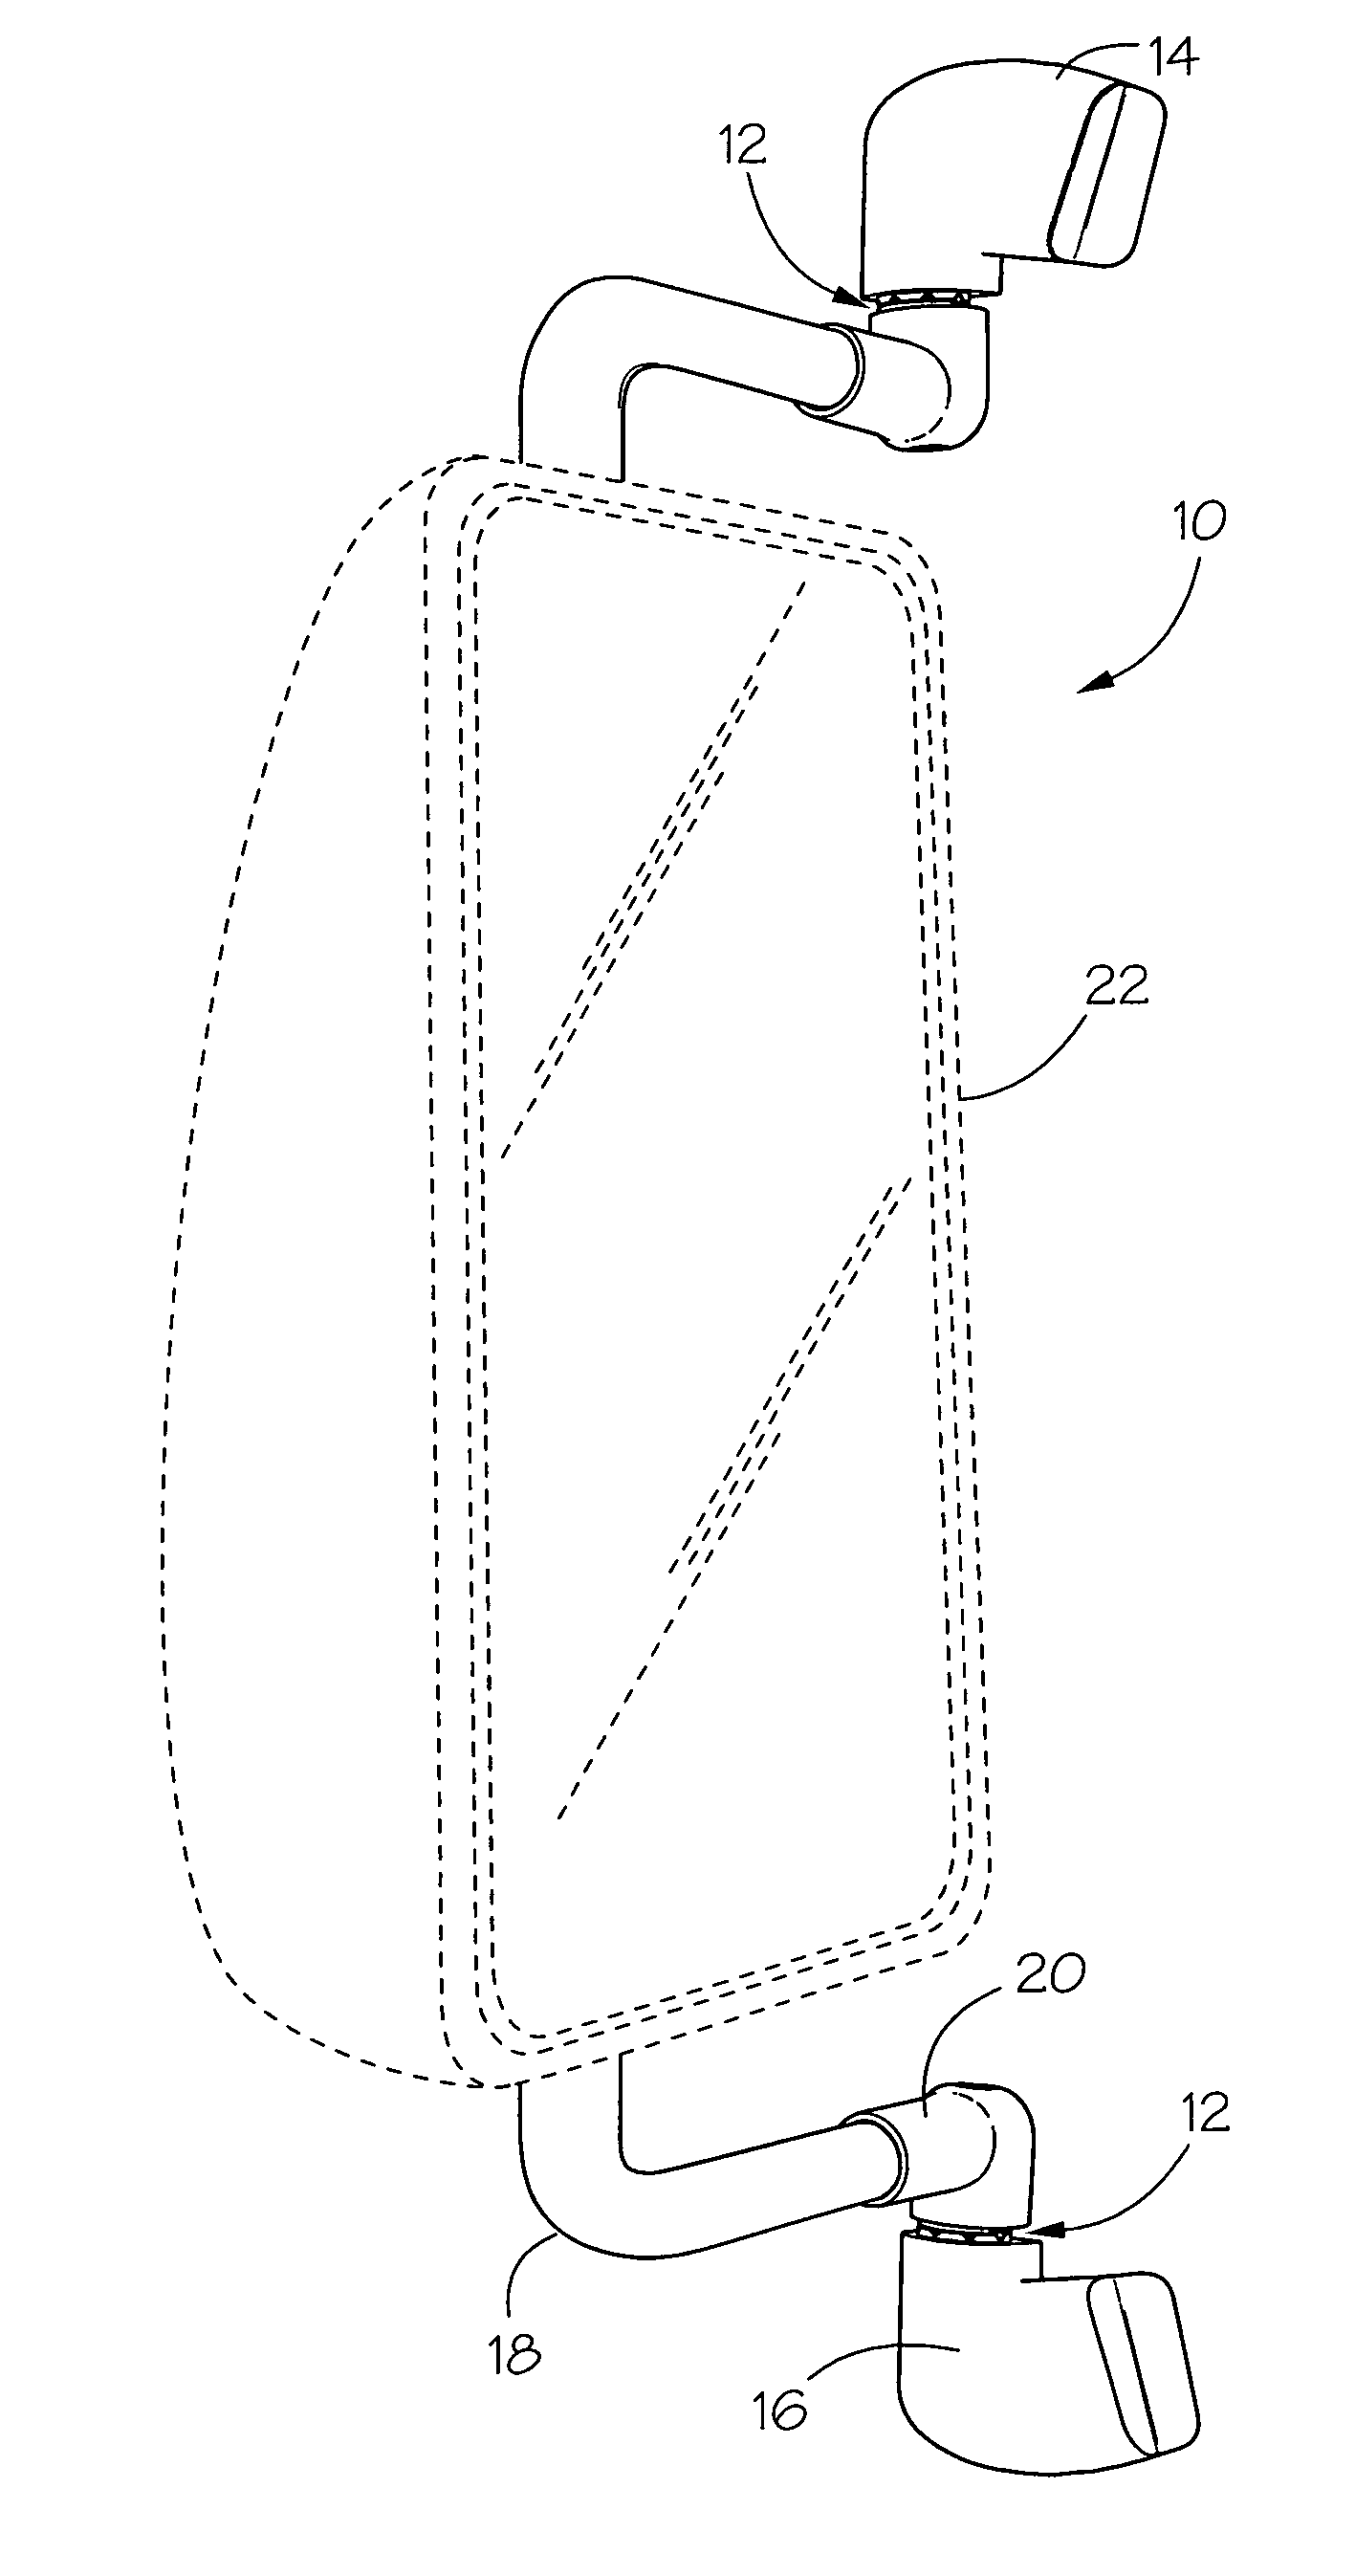 Multi-axis pivoting detent joint assembly for an exterior vehicle mirror